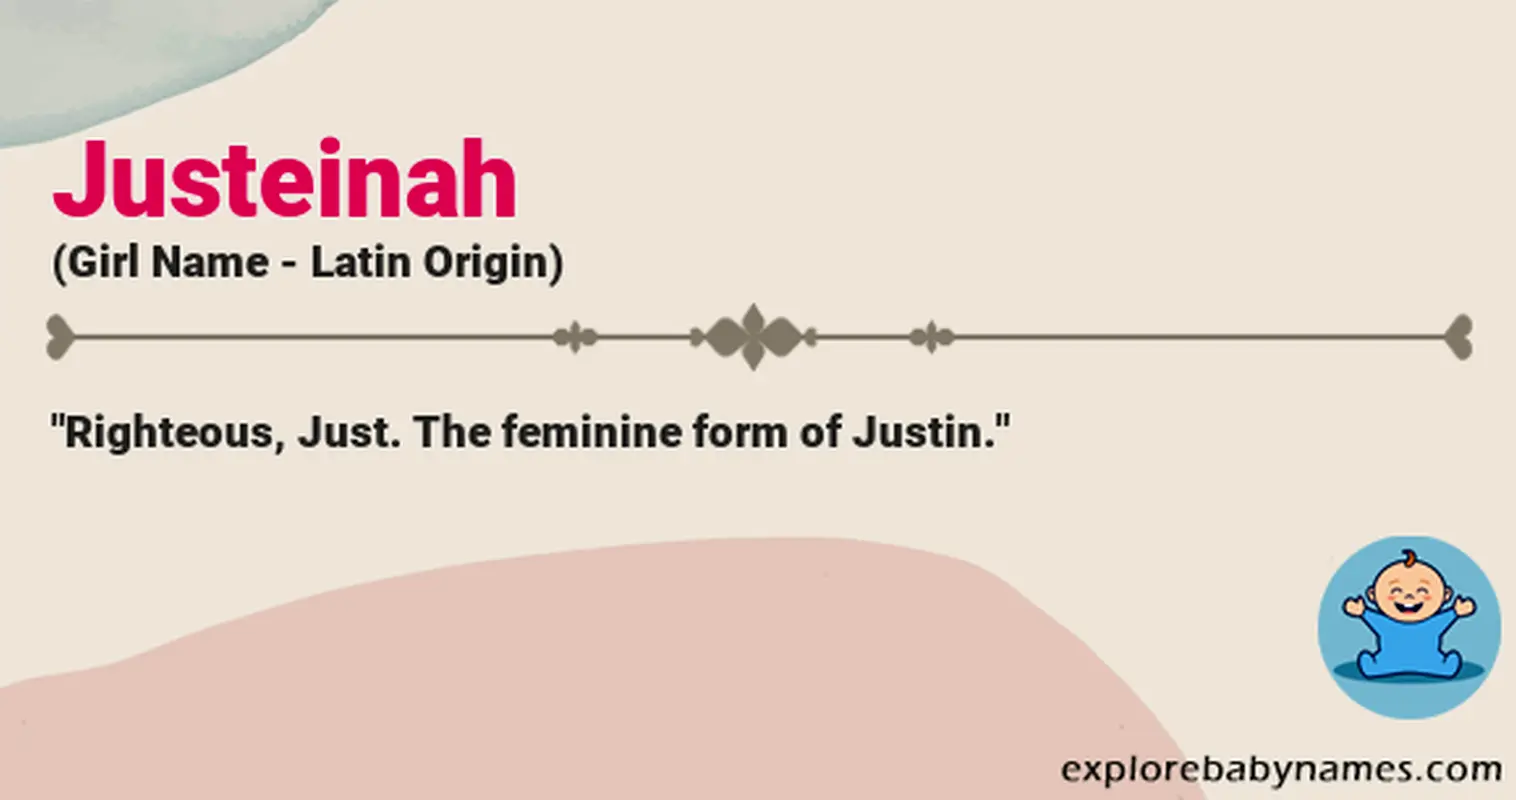 Meaning of Justeinah